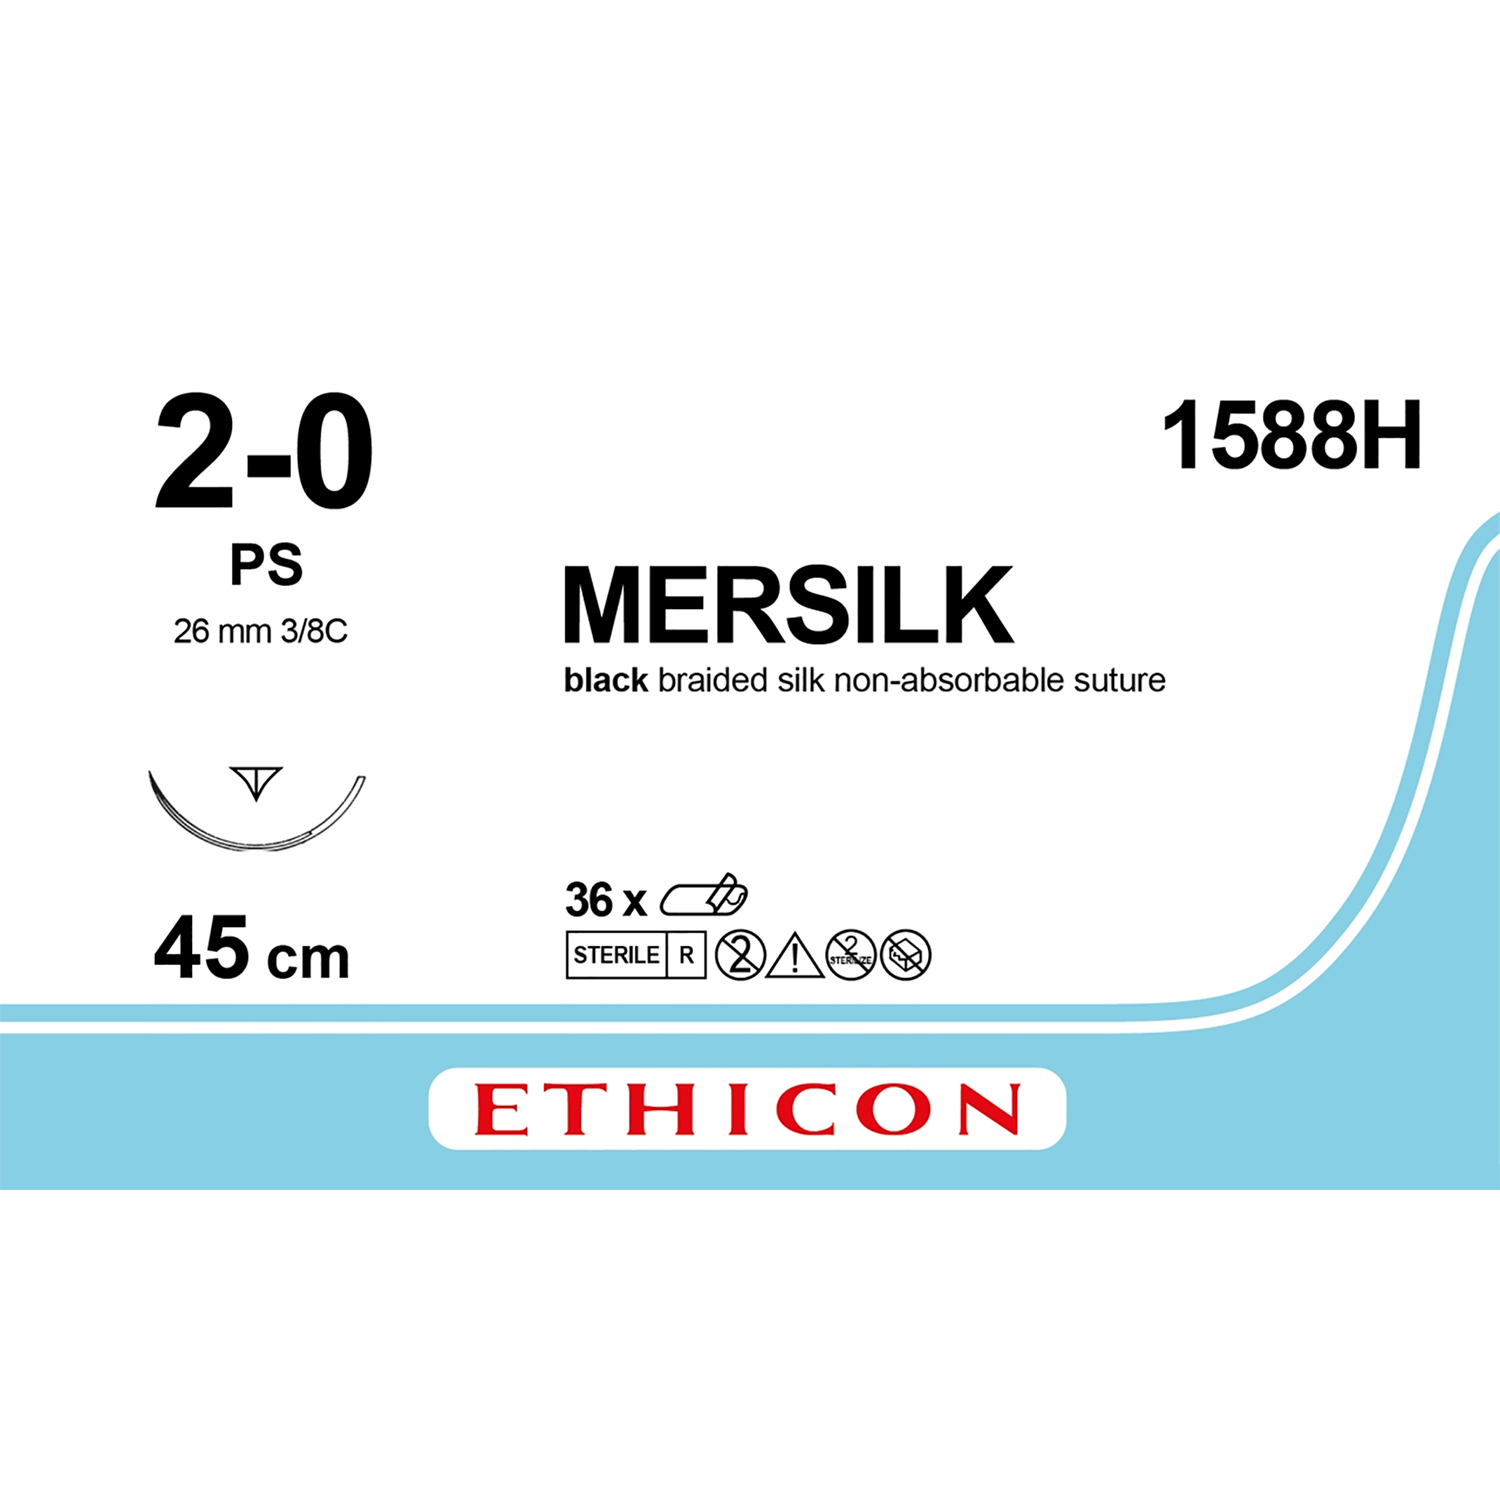 Ethicon Mersilk Suture | Non Absorbable | Black | Size: 2-0 | Length: 18" | Needle: PS | Pack of 36